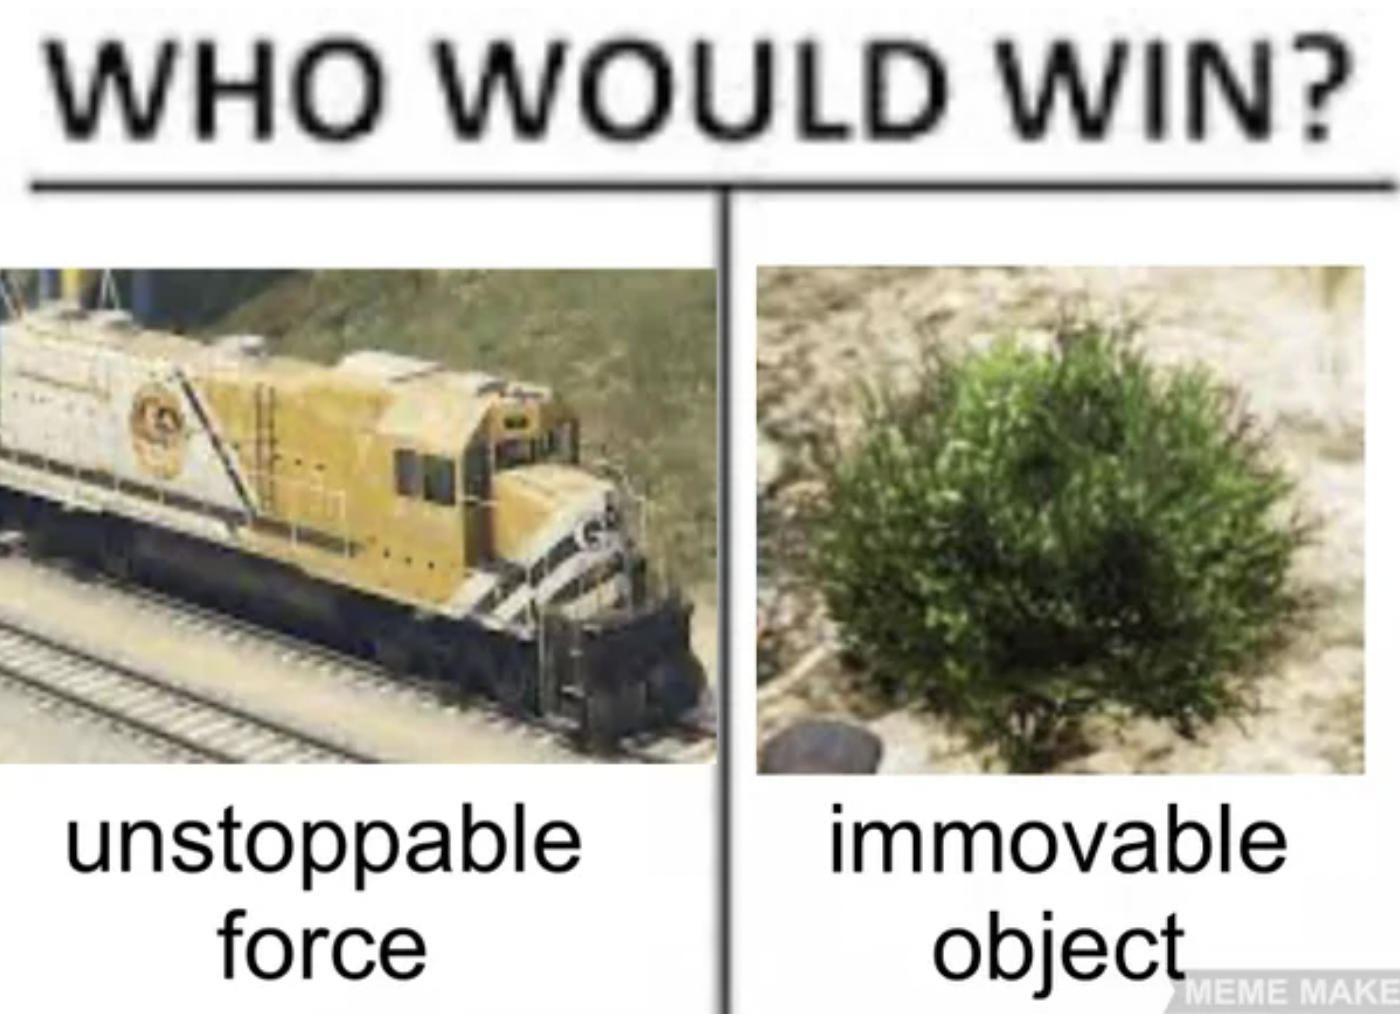 GTA V Memes - track - Who Would Win? unstoppable force immovable object